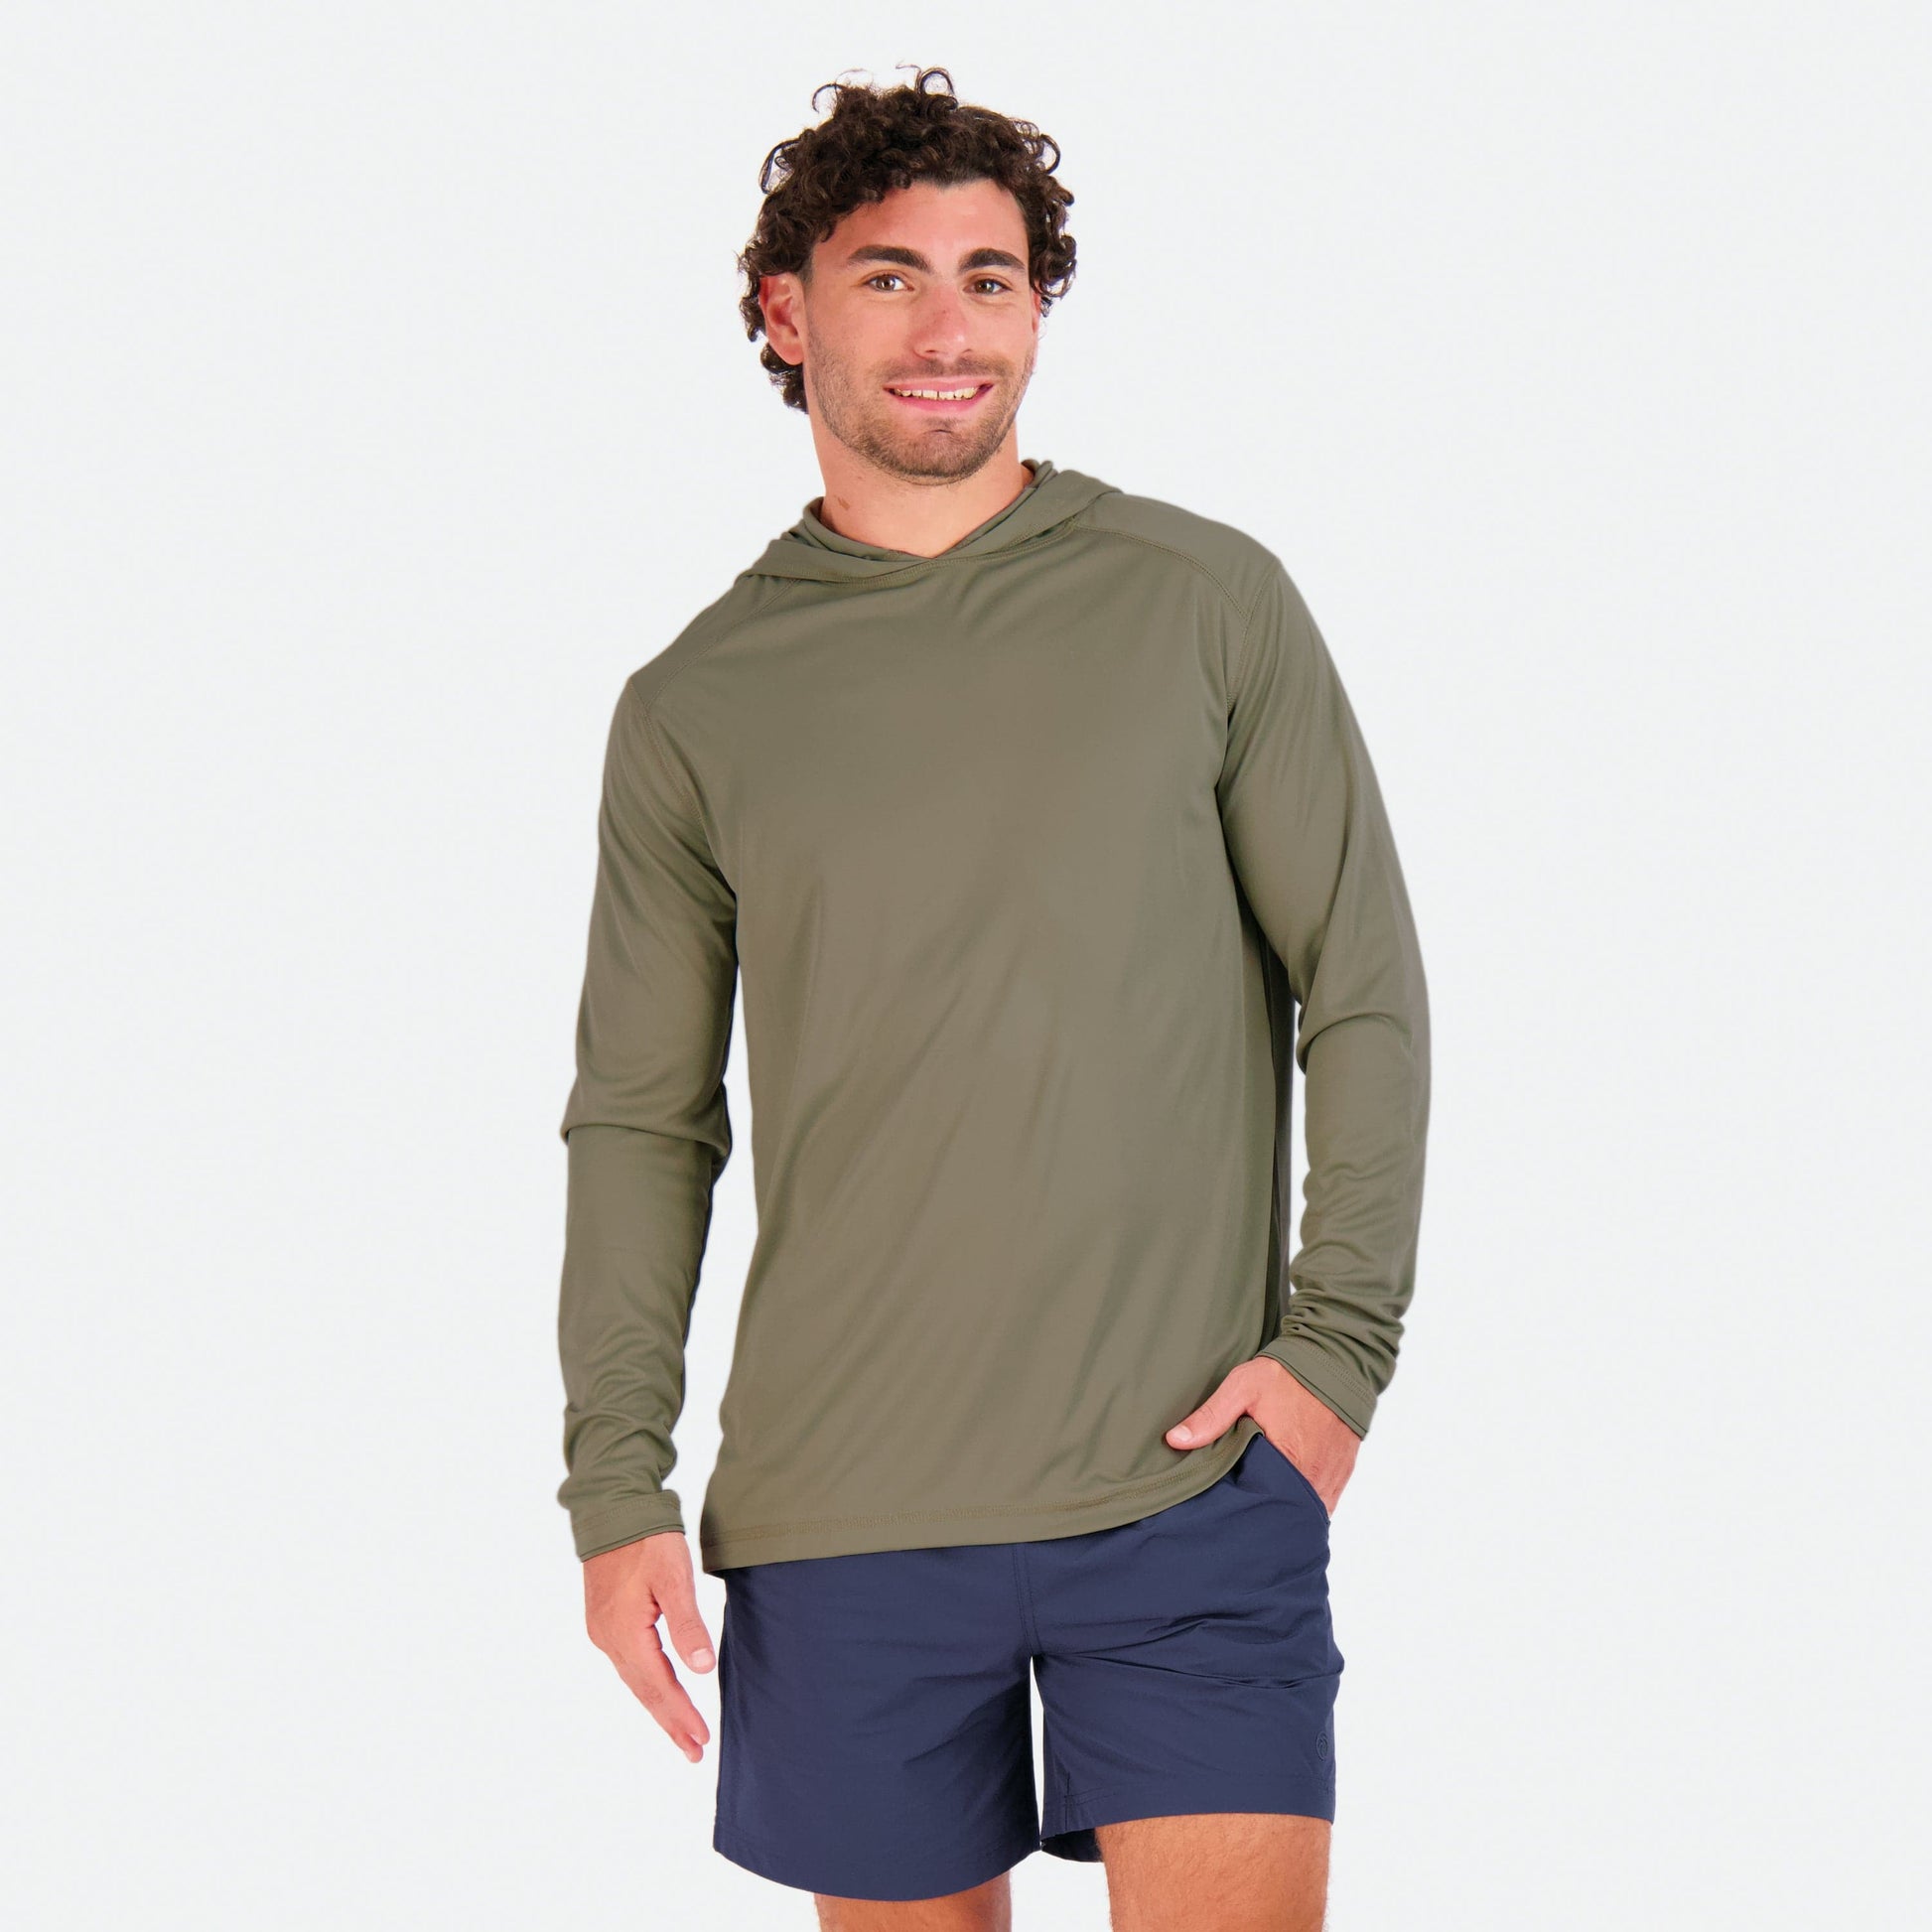 Mens Sun protection clothing T-Shirt Hoodie Long Sleeve Tops